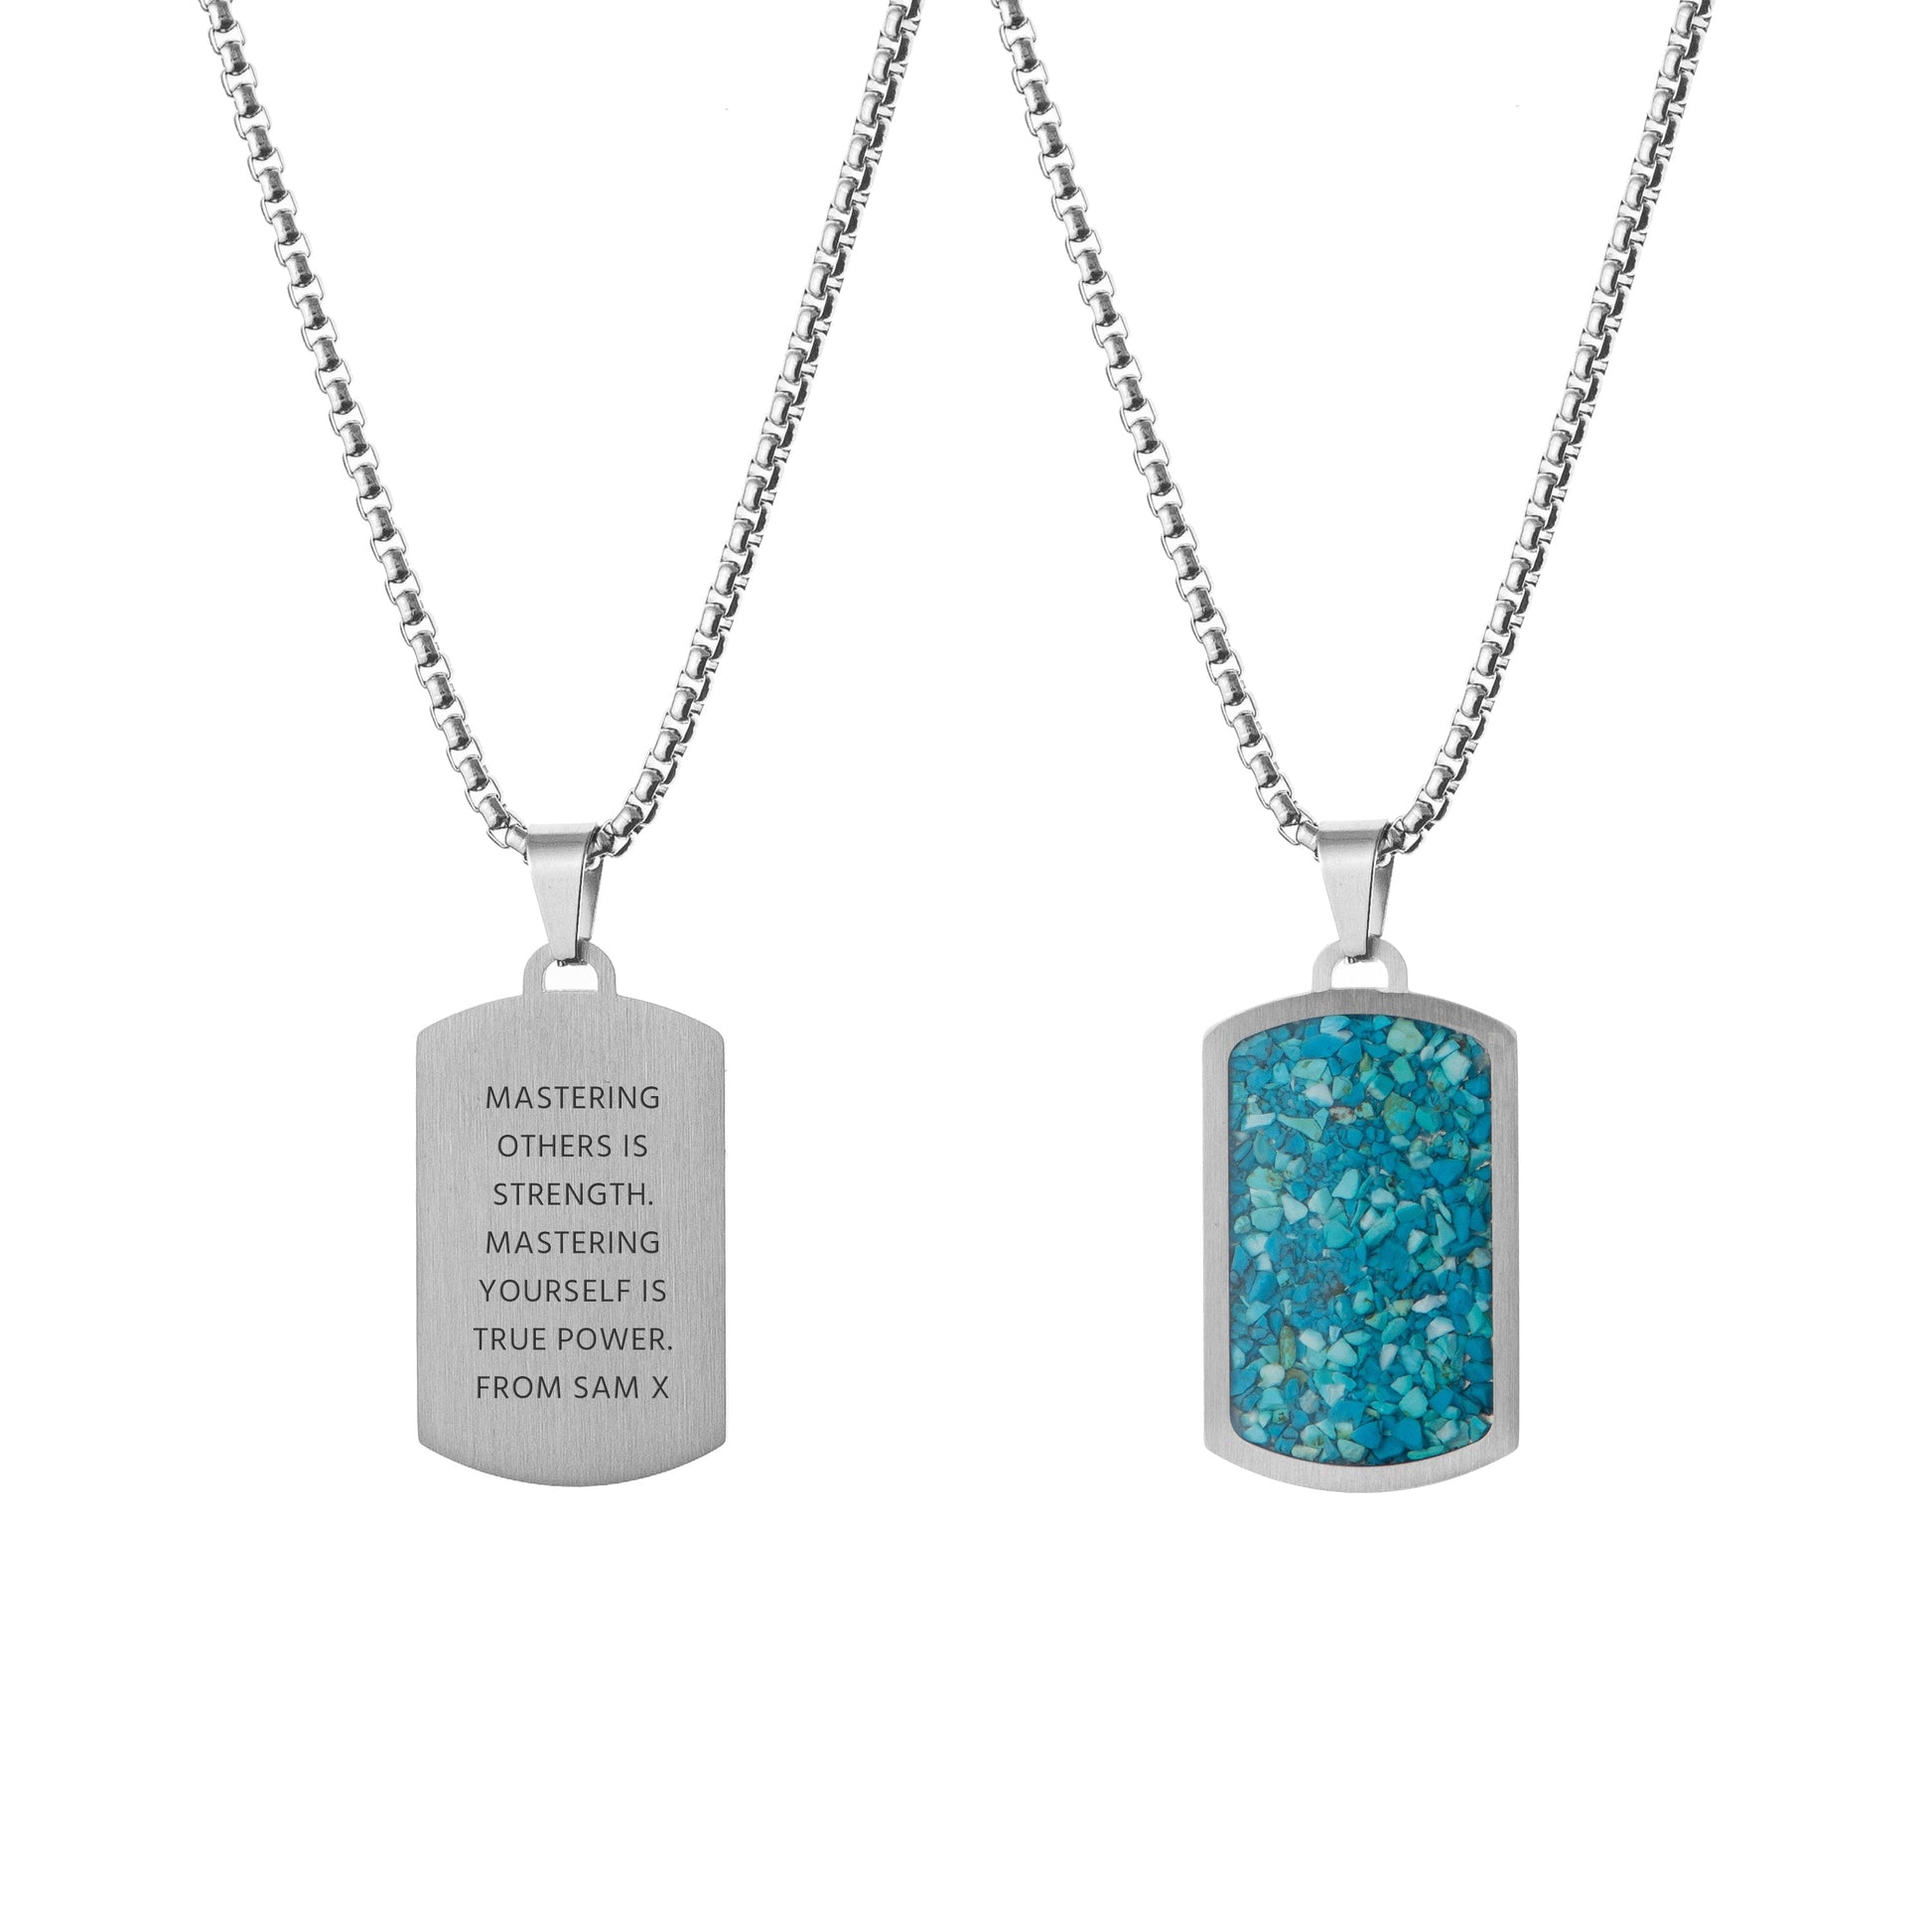 Personalized men's necklaces - Personalized Men's Blue Turquoise Dog Tag Necklace 